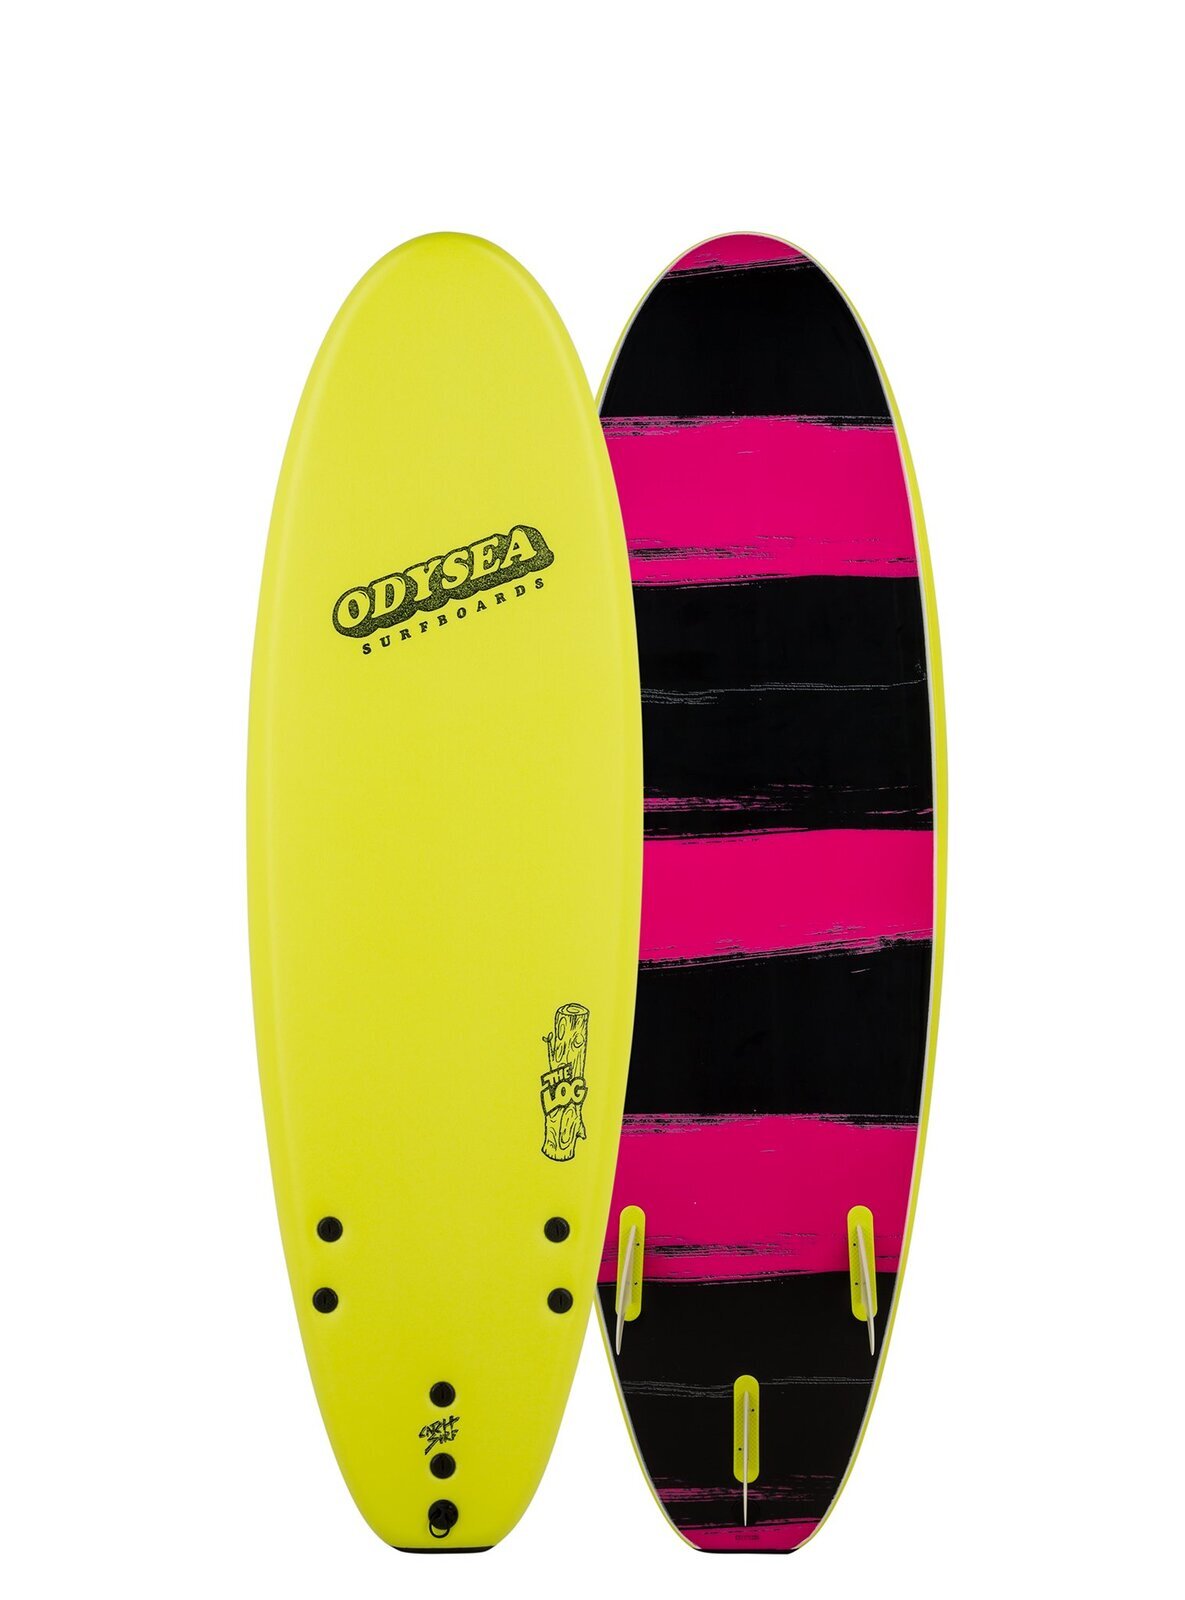 Catch Surf Log 6'0 Tri Fin. This surfboard is suitable for